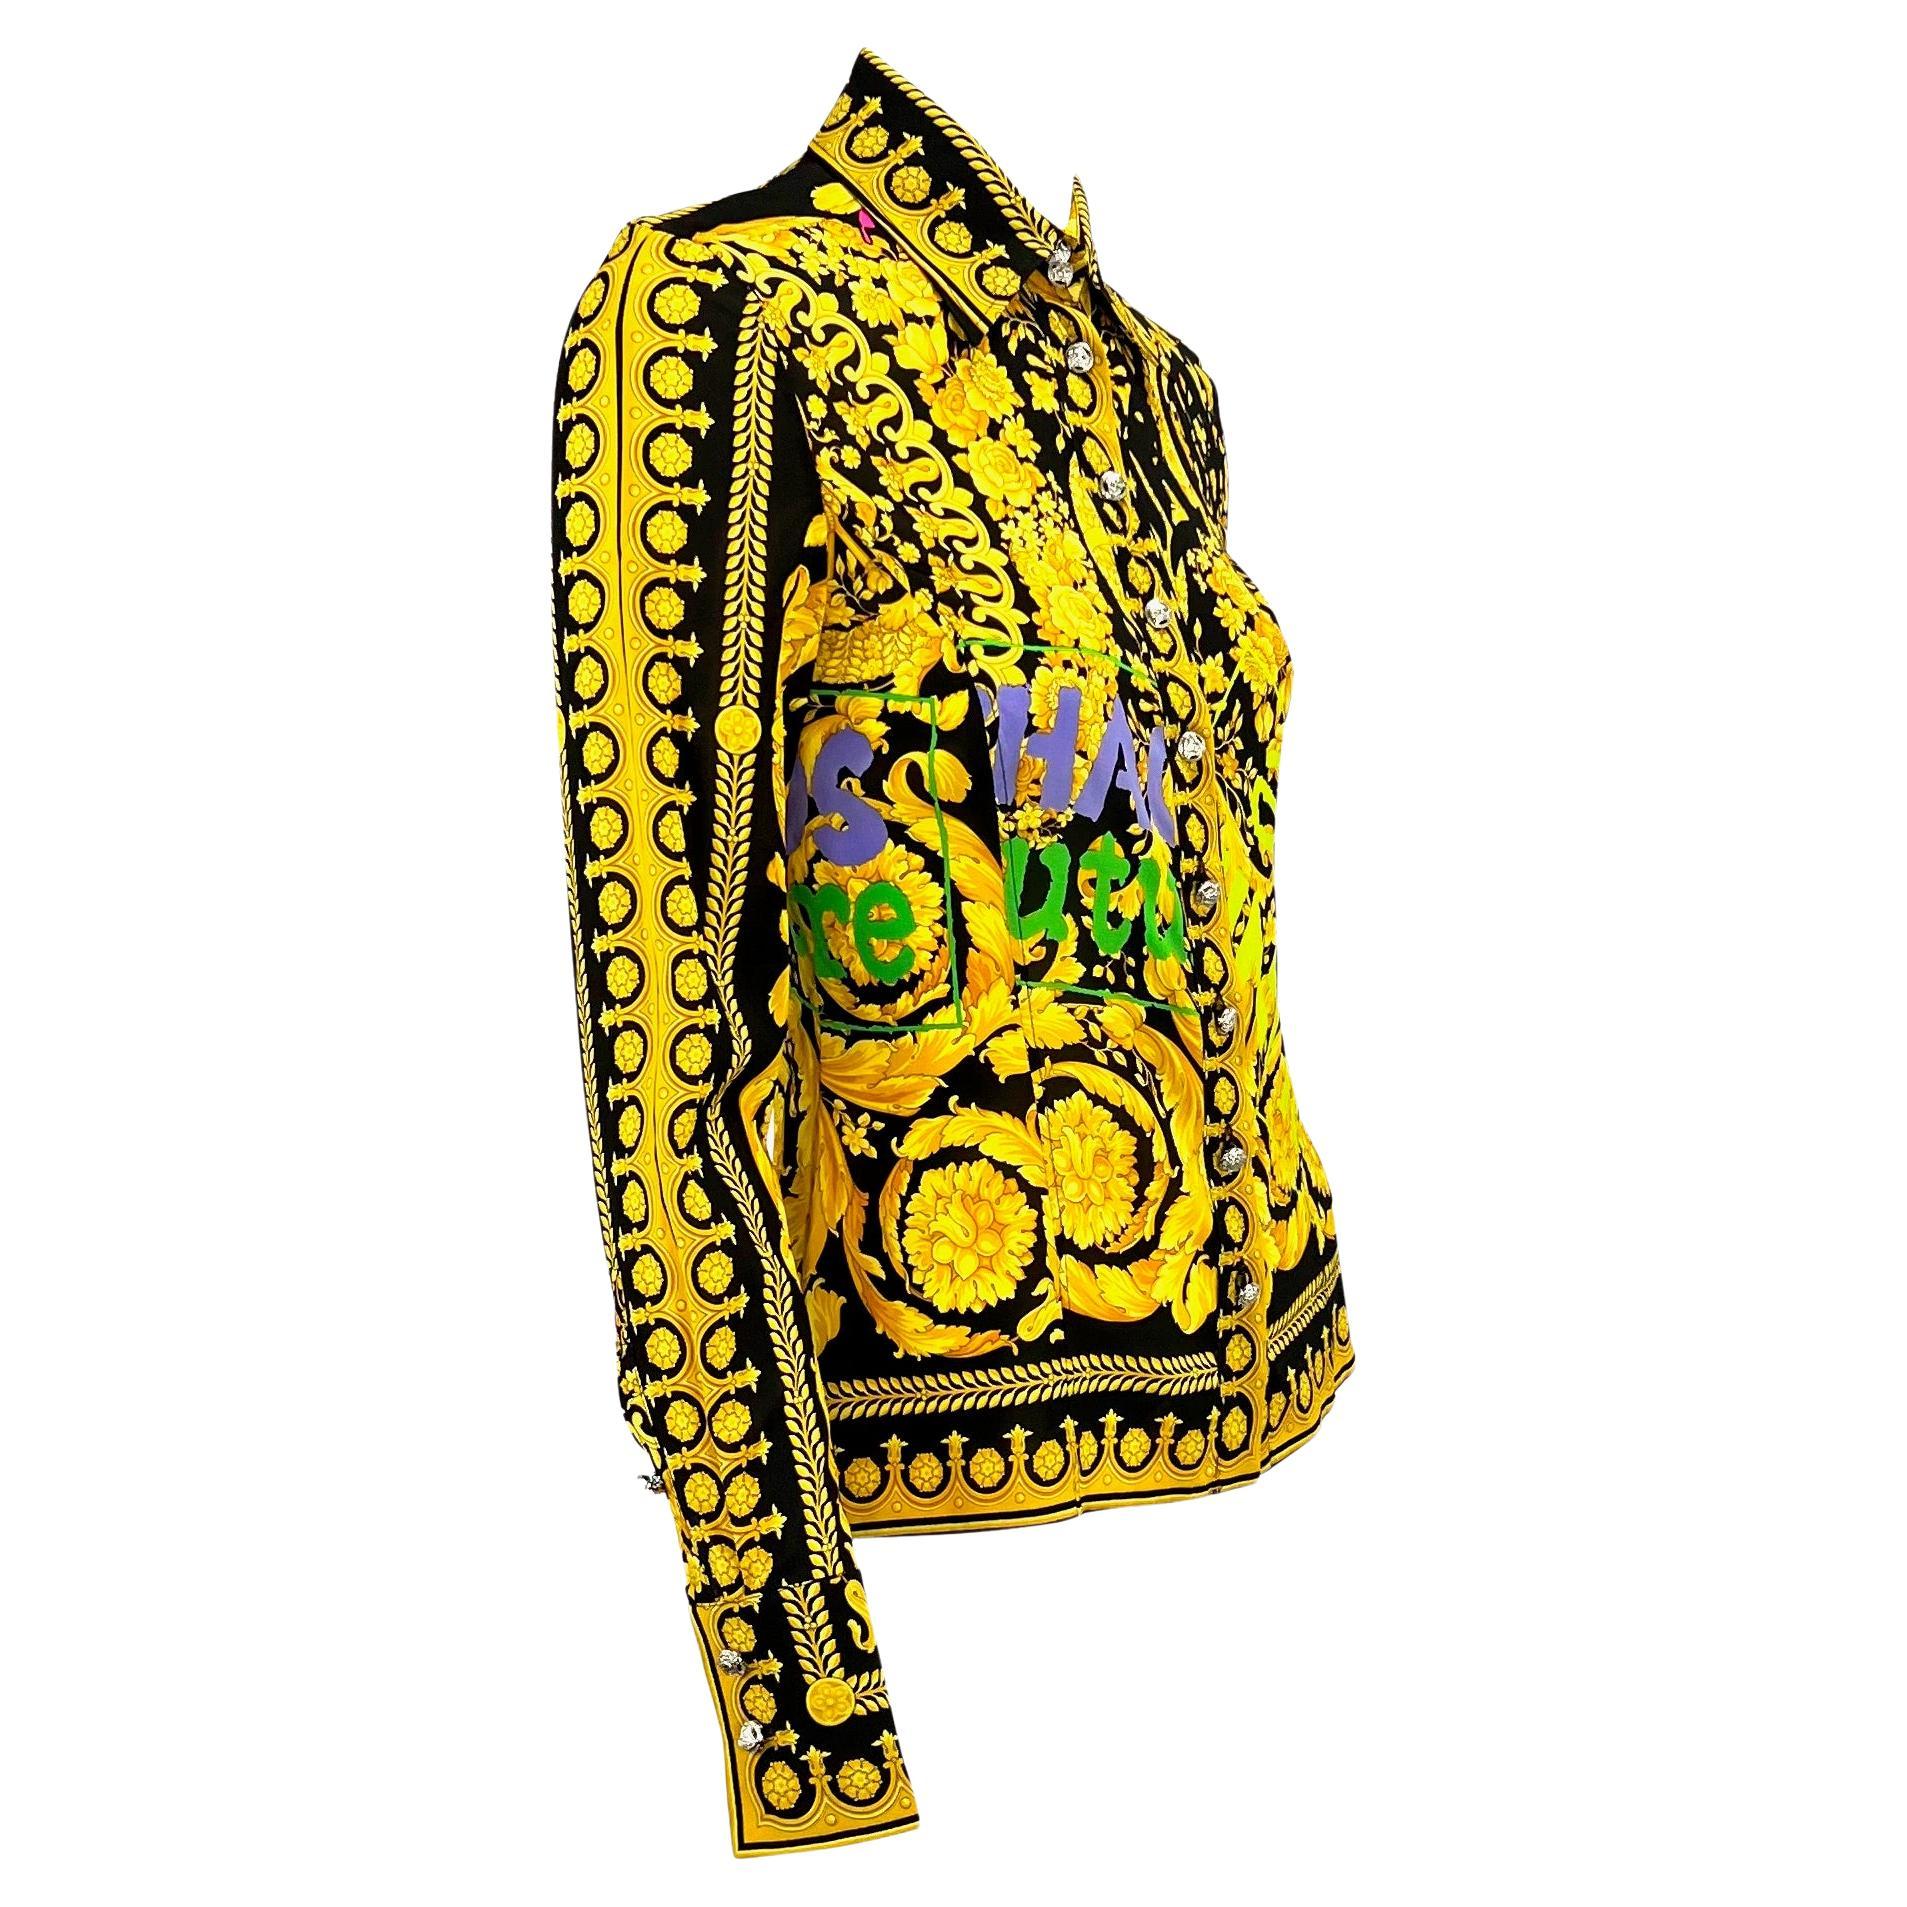 Women's NWT S/S 2005 Versace by Donatella Chaos Couture Gold Baroque Graffiti Print Top For Sale